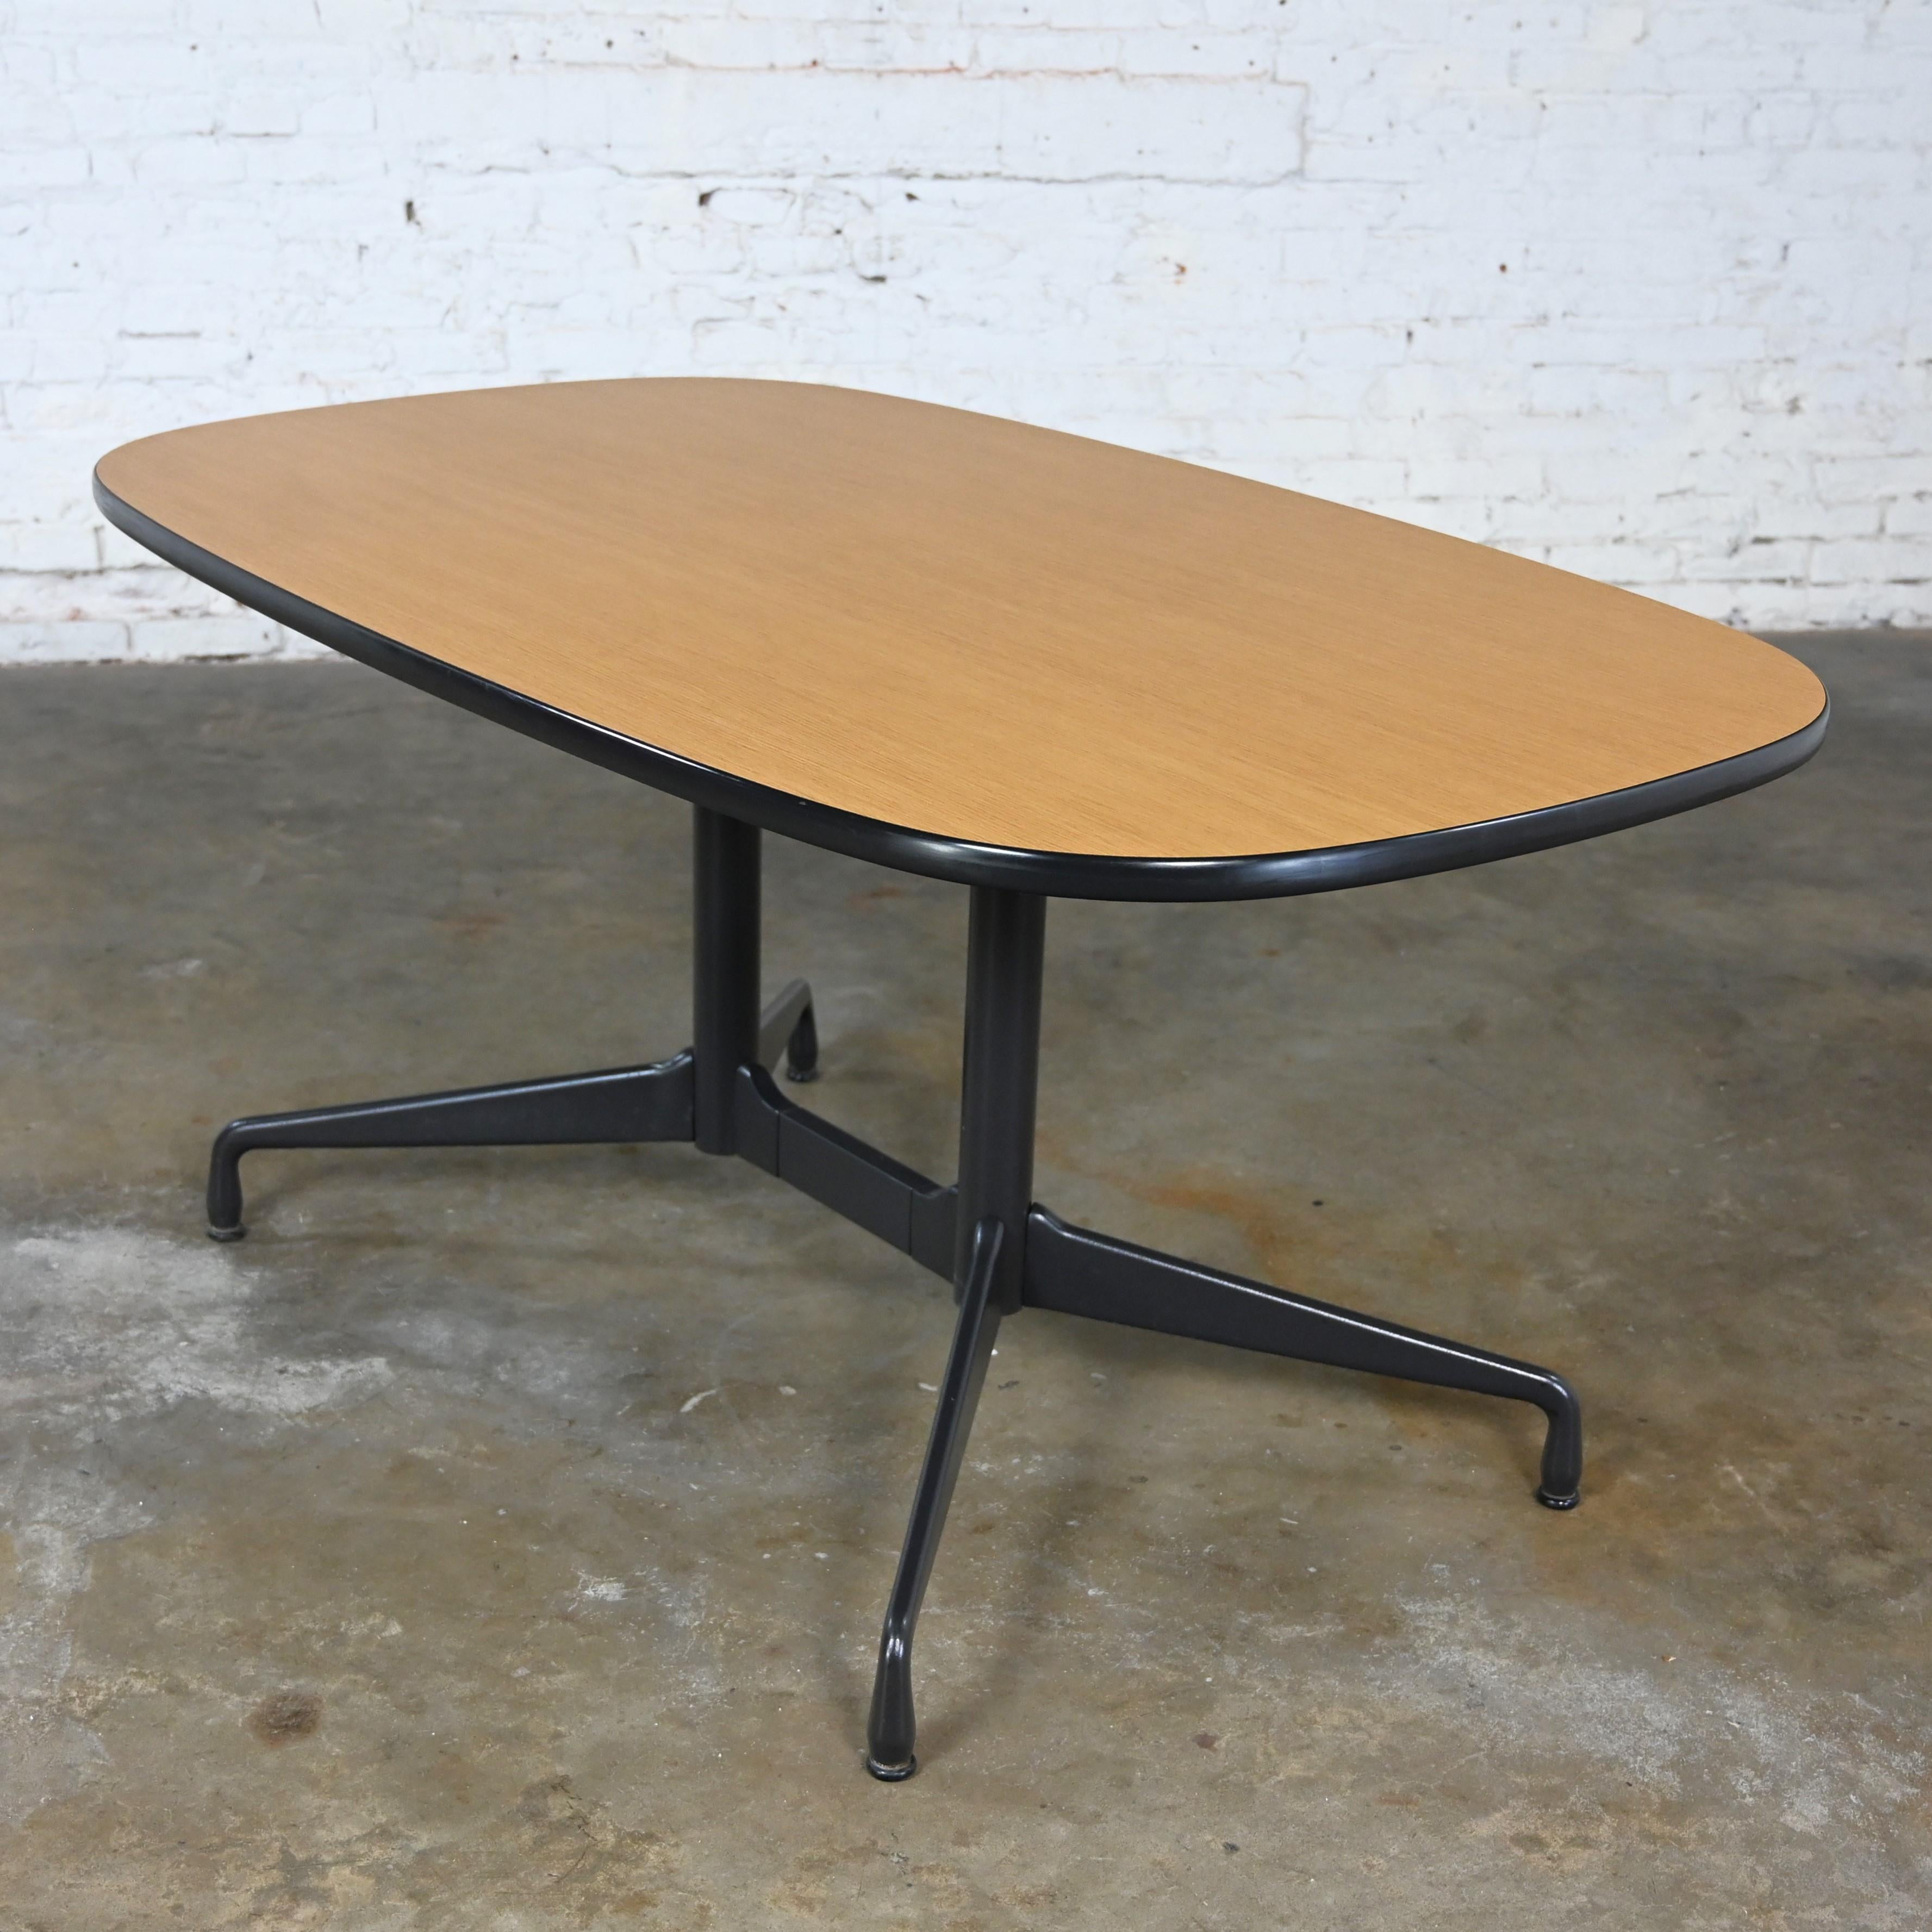 Eames Herman Miller Oval Conference Dining Table Universal Segmented Laminate #2 For Sale 4